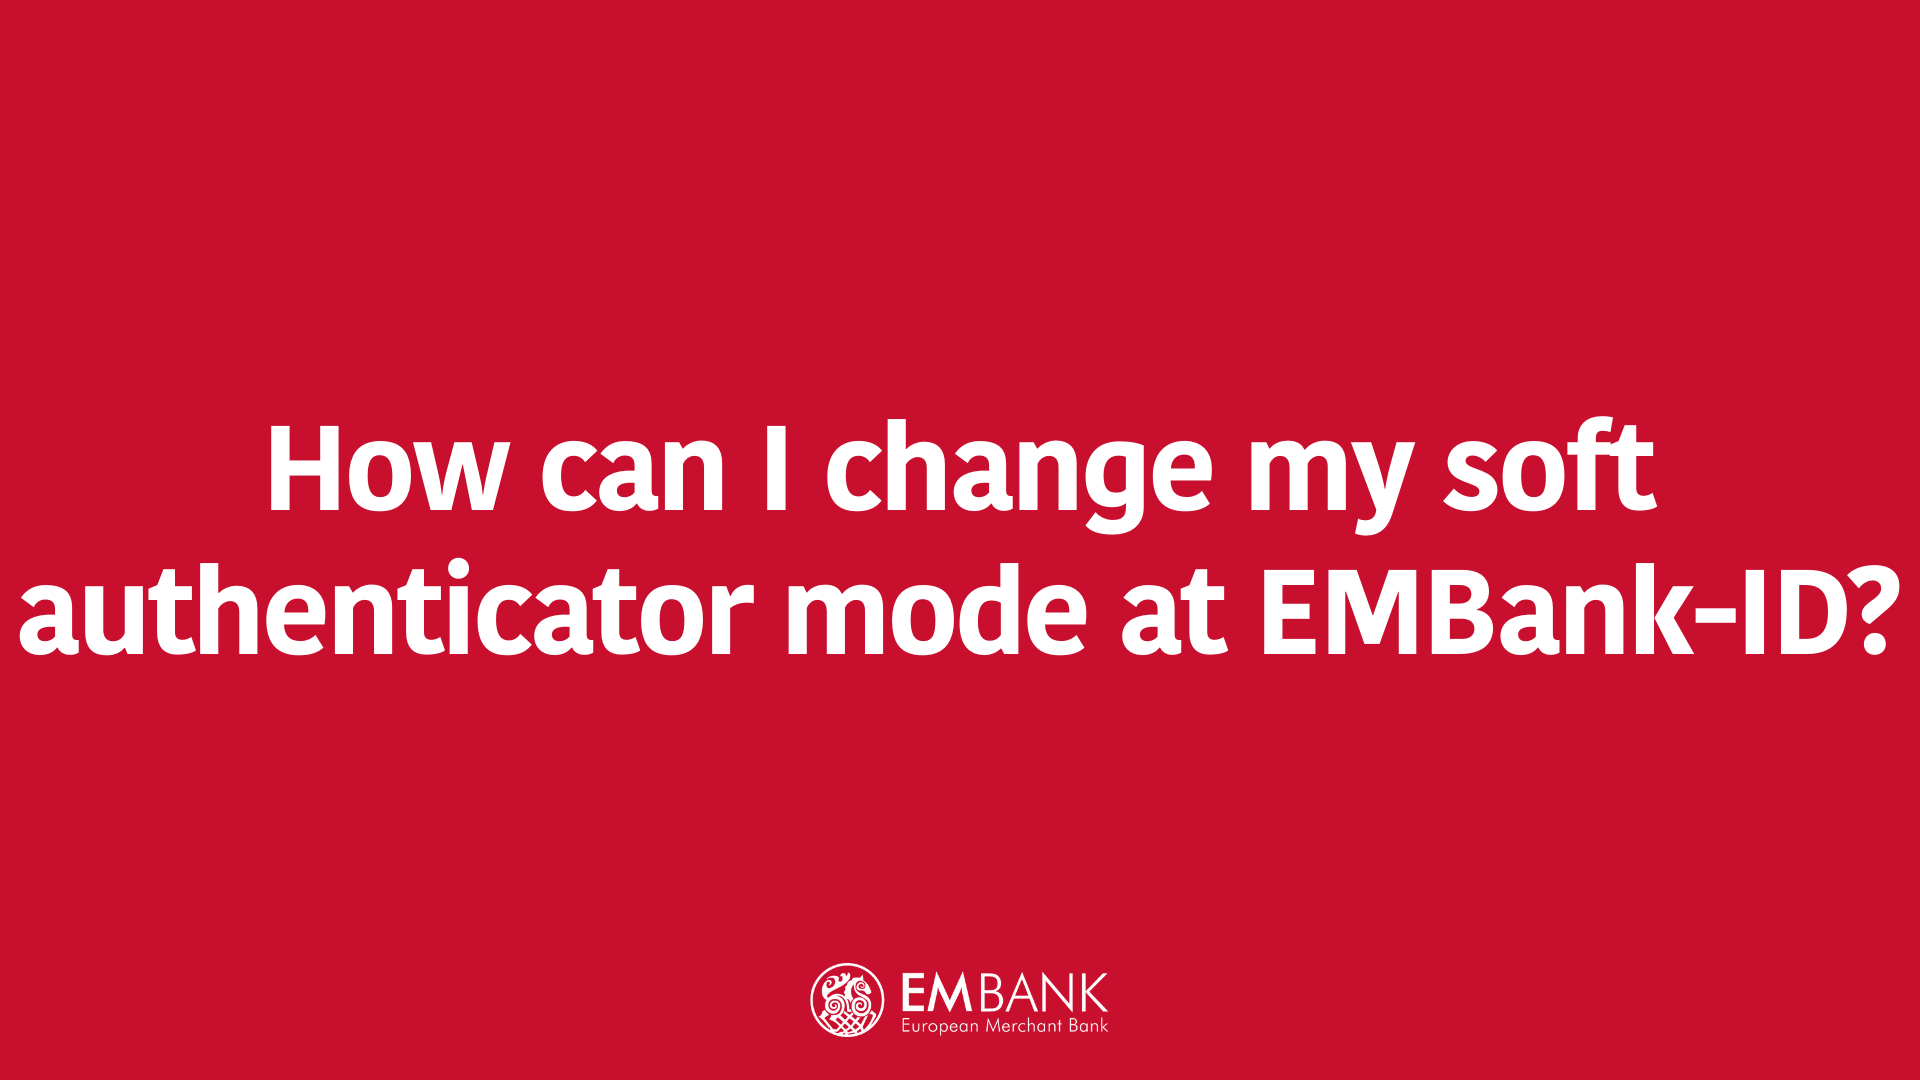 How can I change my soft authenticator mode at EMBank-ID?